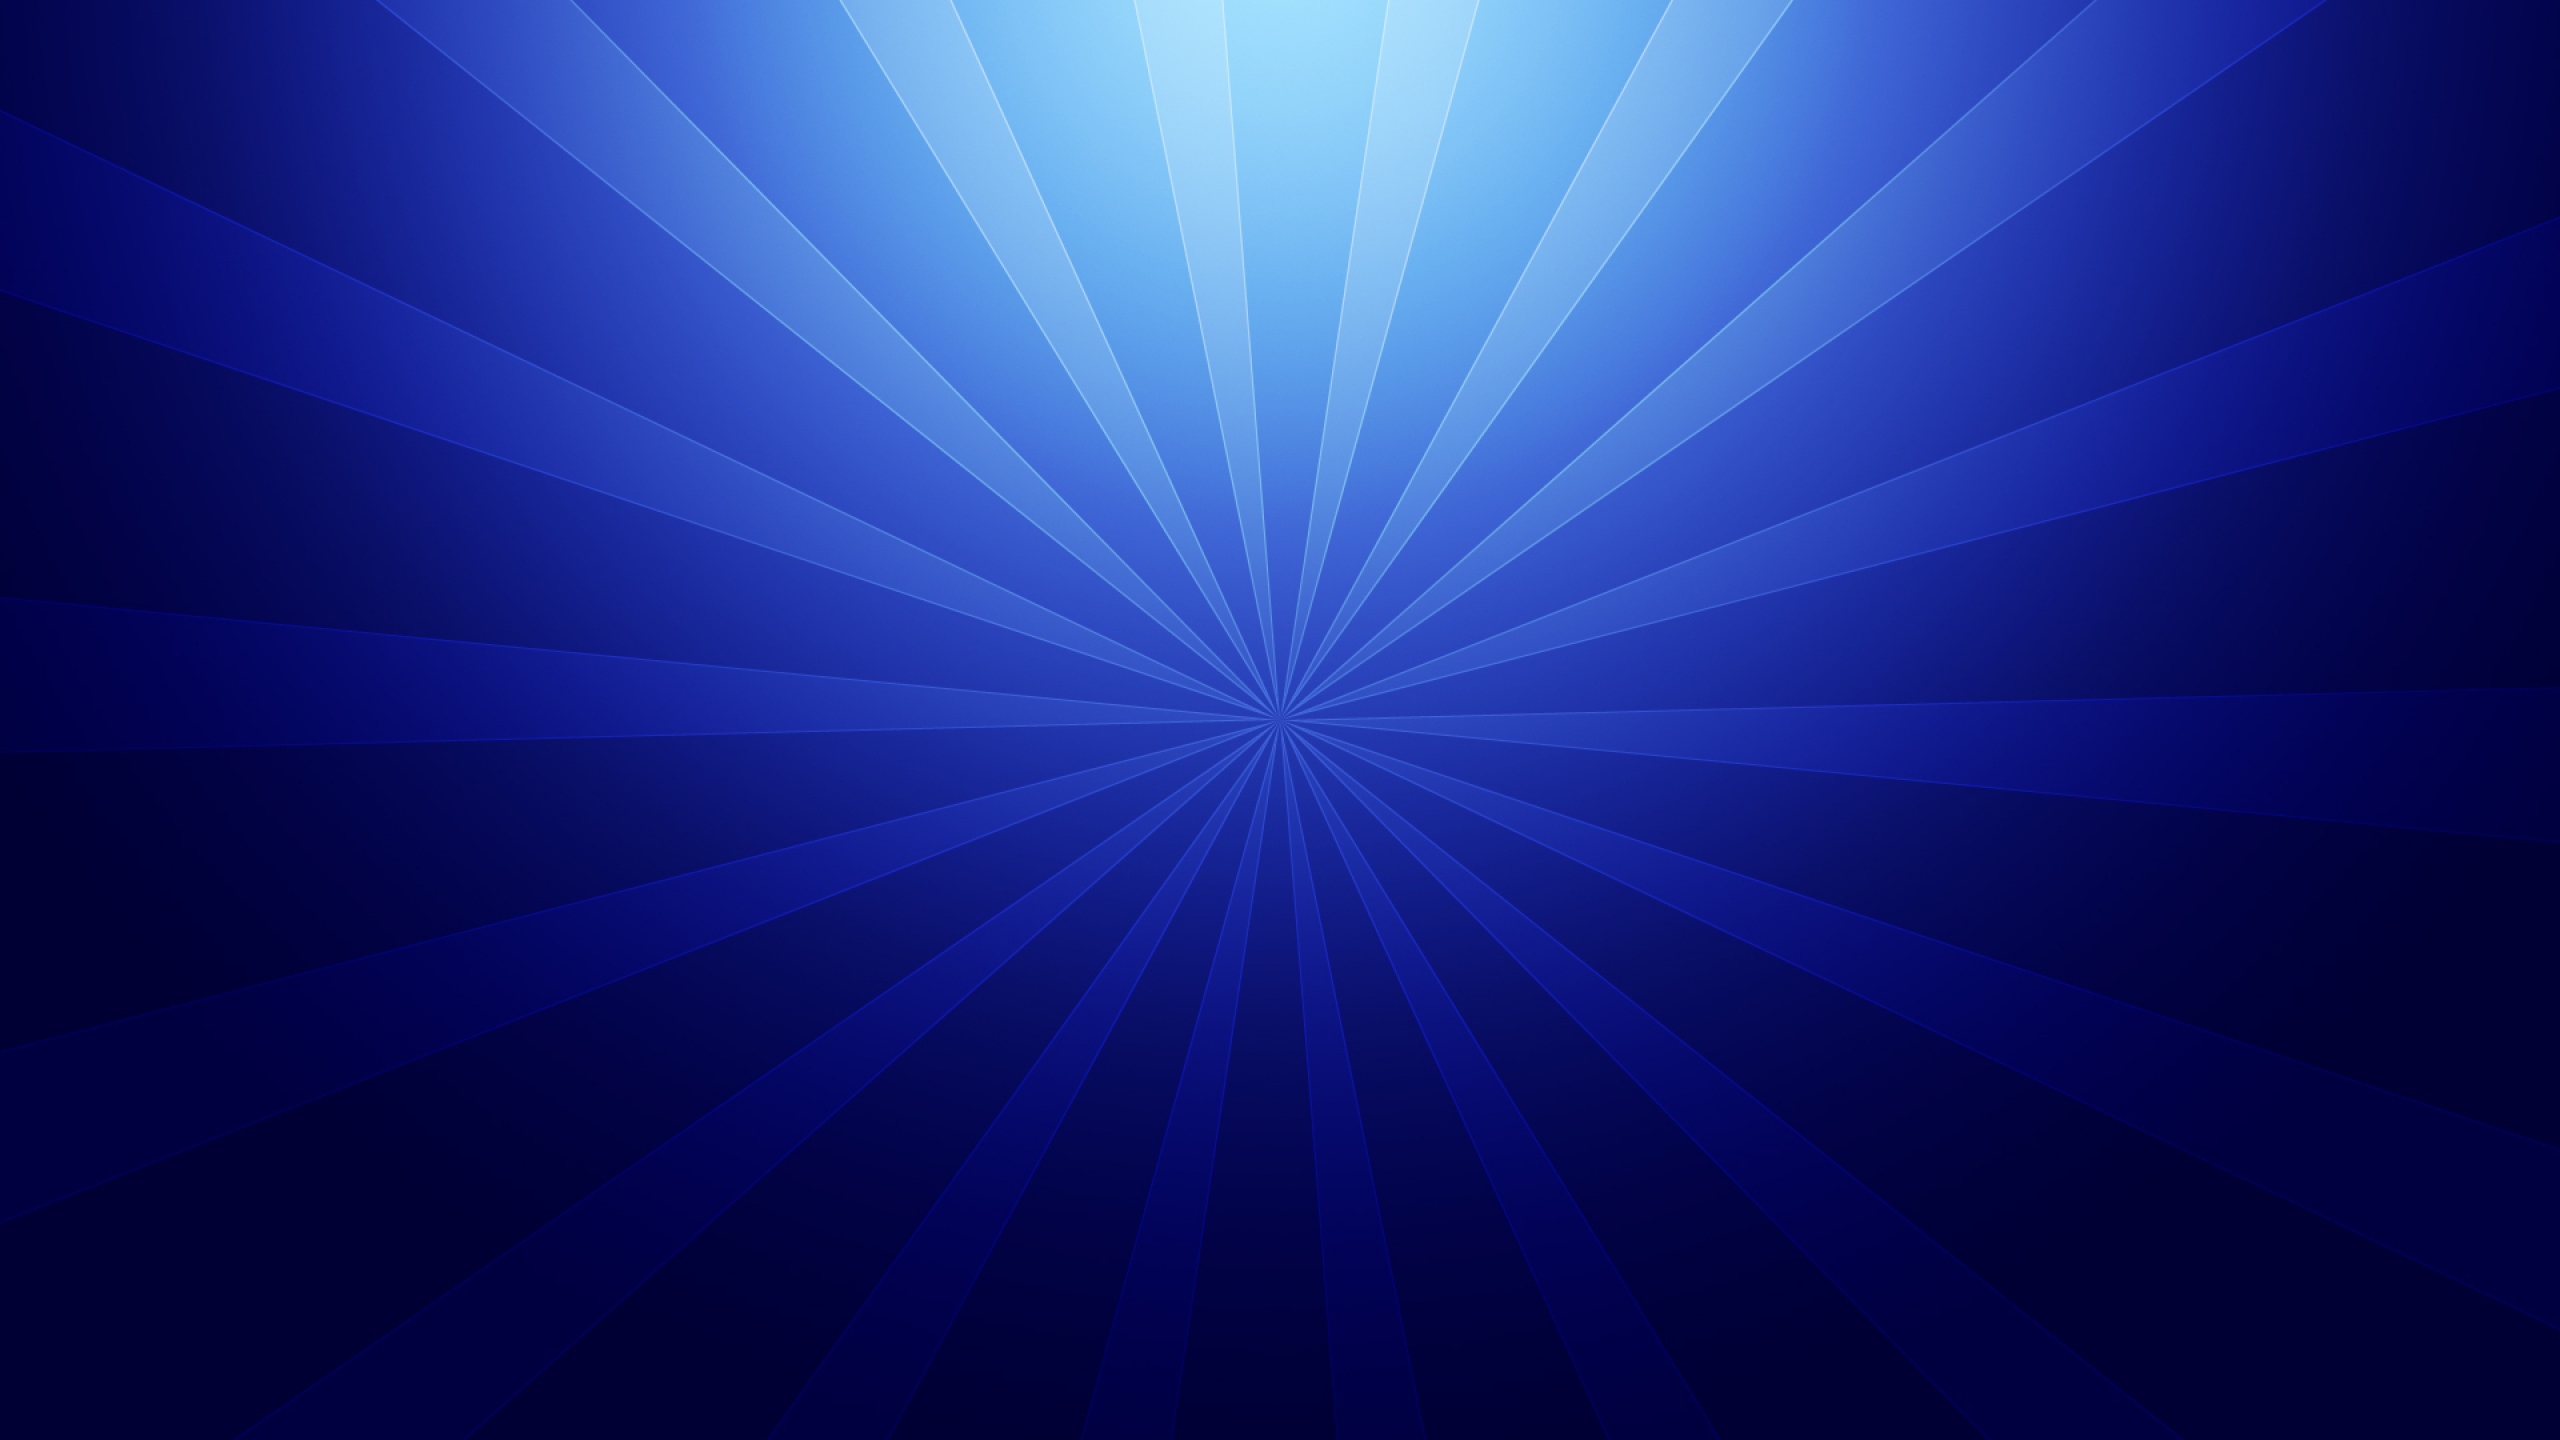 Wallpaper Abstract Blue Rays Line Creative Background